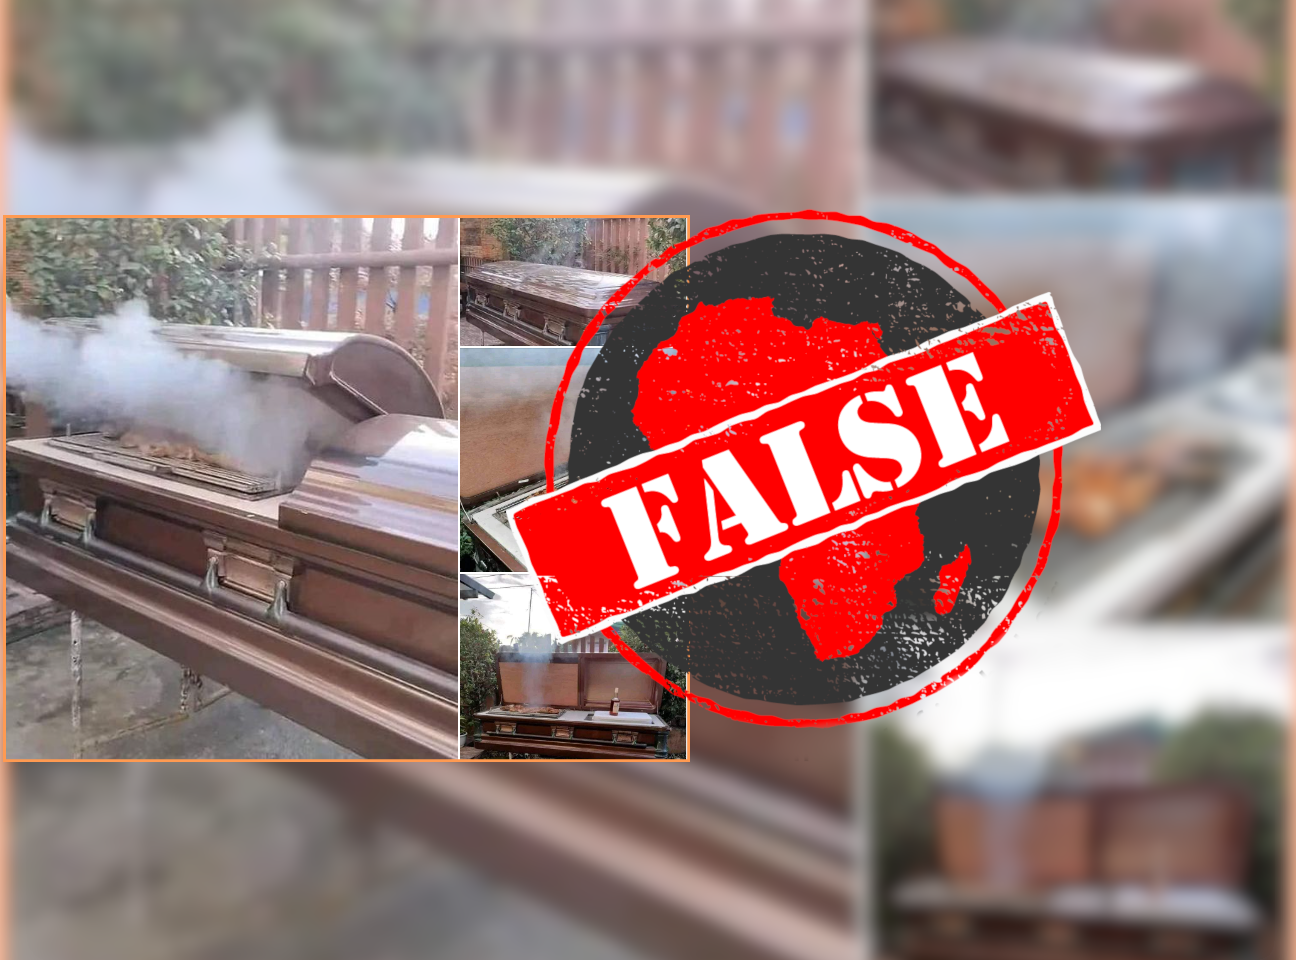 False evidence of claim that coffin used to make grill in Kenya